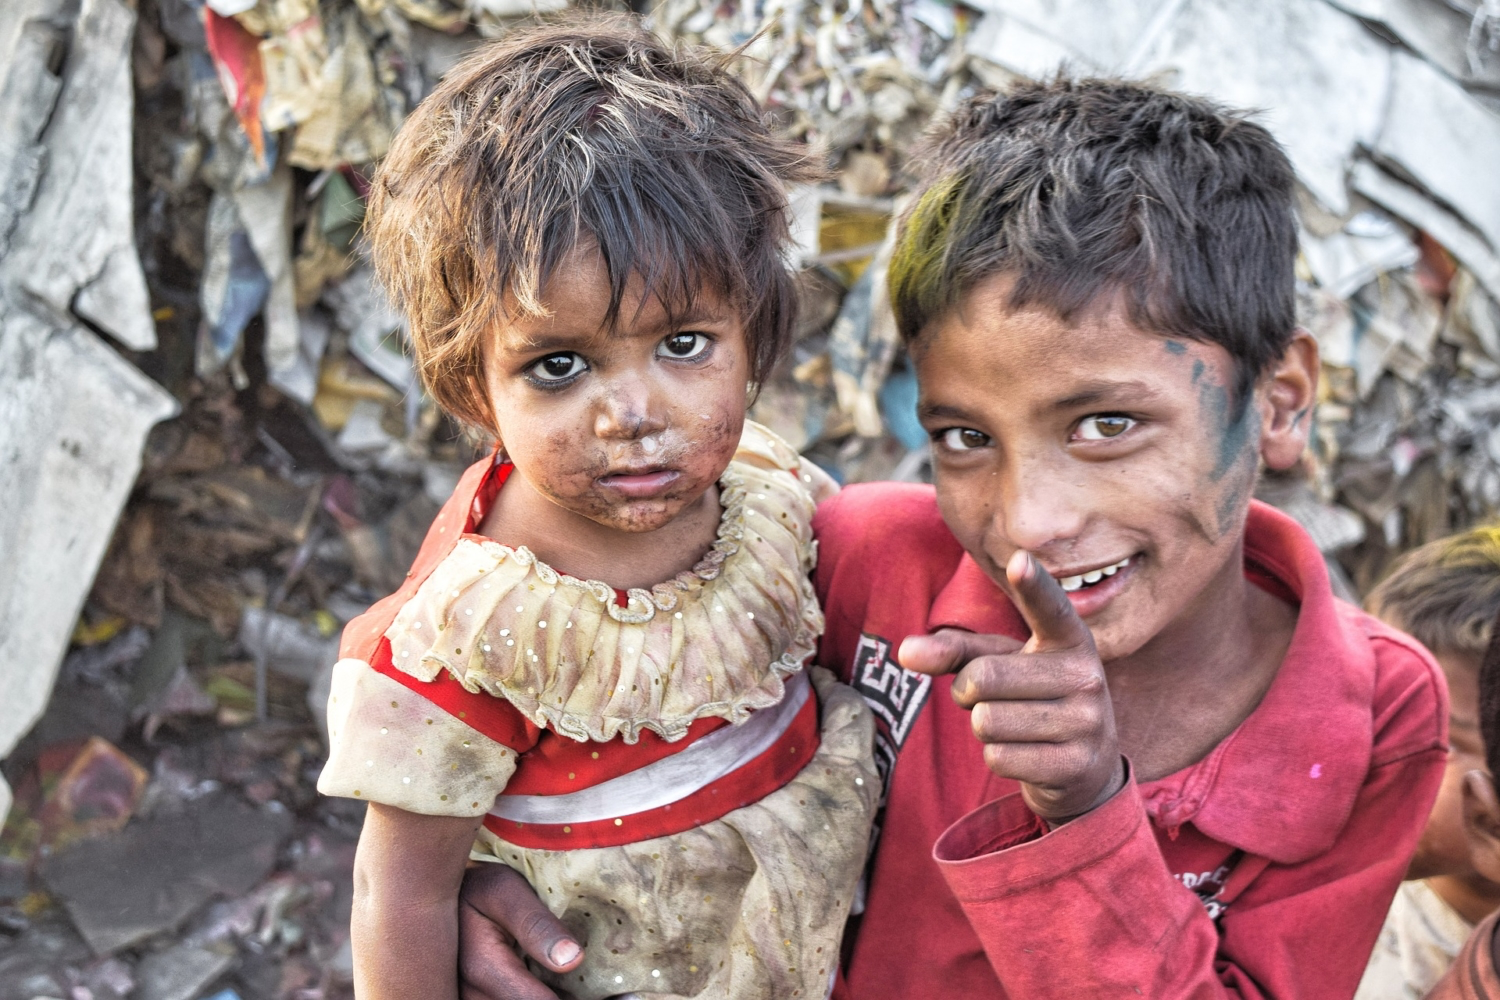 Two young children in dirty and tattered clothes smiling at the camera.